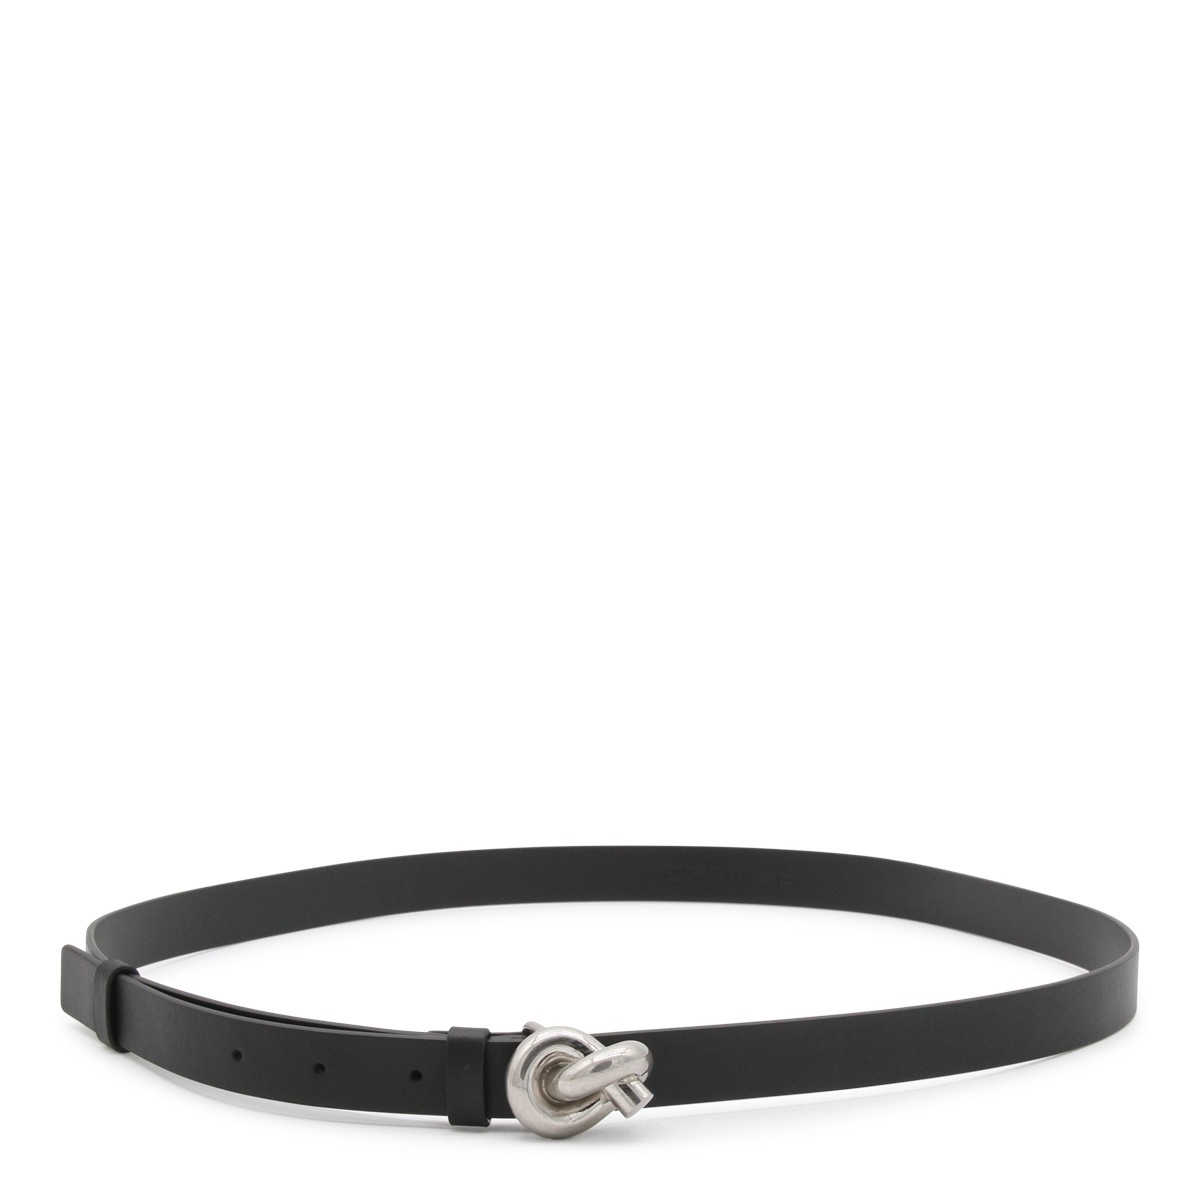 BLACK AND SILVER LEATHER KNOT BELT